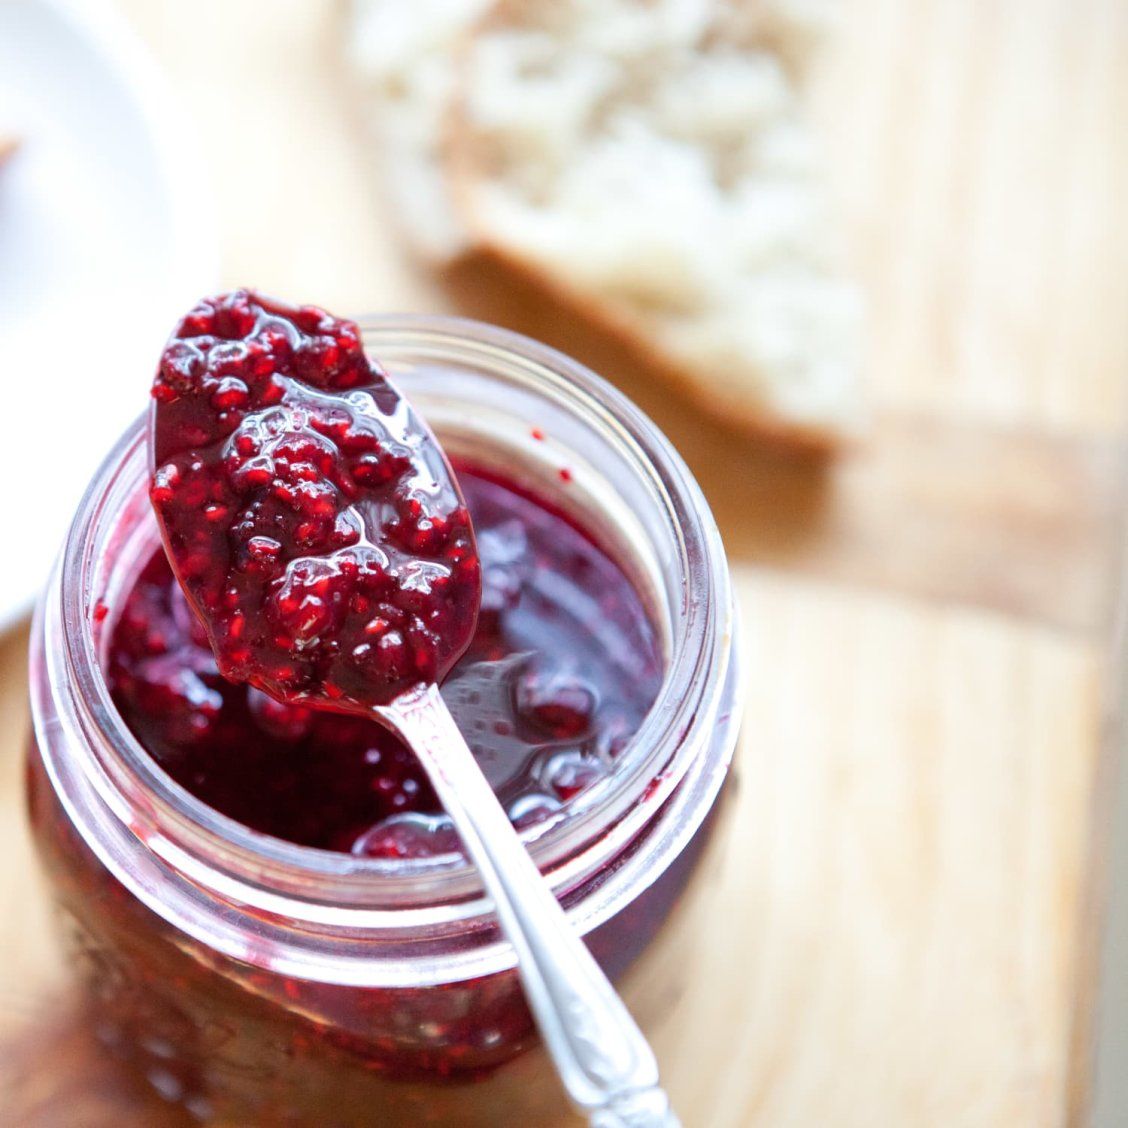 The easiest way to make date jam